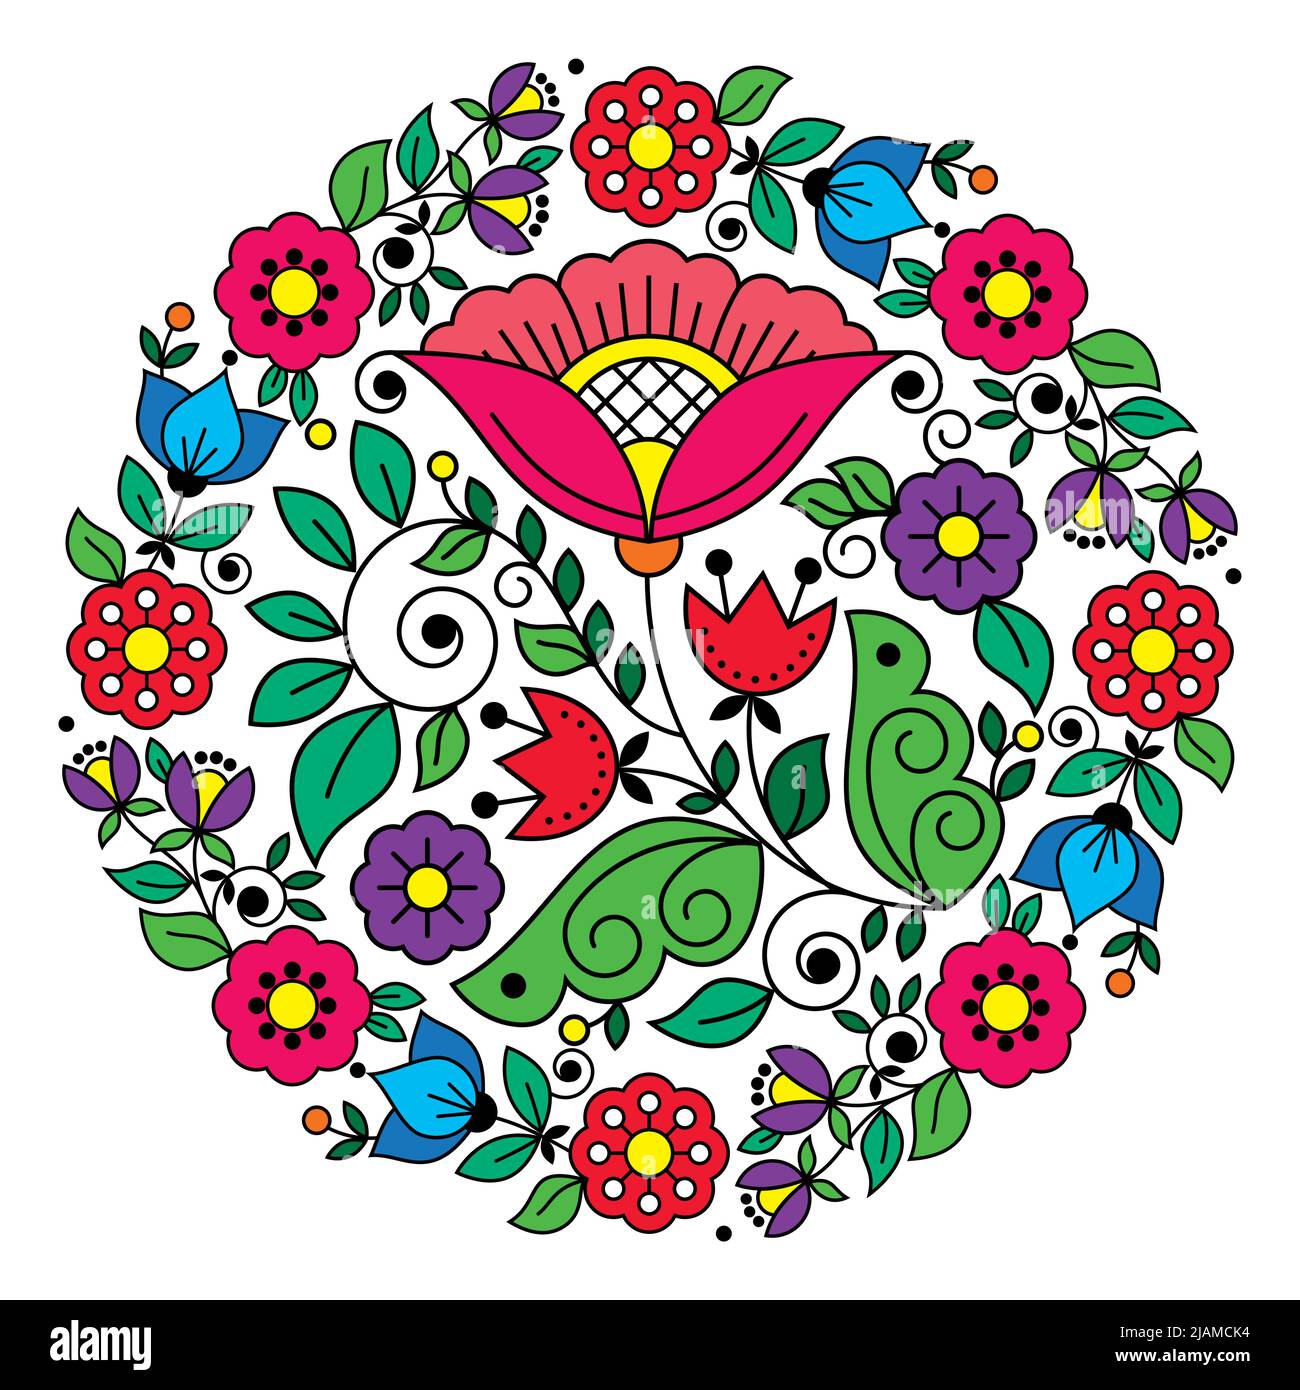 Scandinavian folk art vector floral mandala design pattern in frame inspired by the traditional embroidery from Sweden, Norway and Denmark Stock Vector